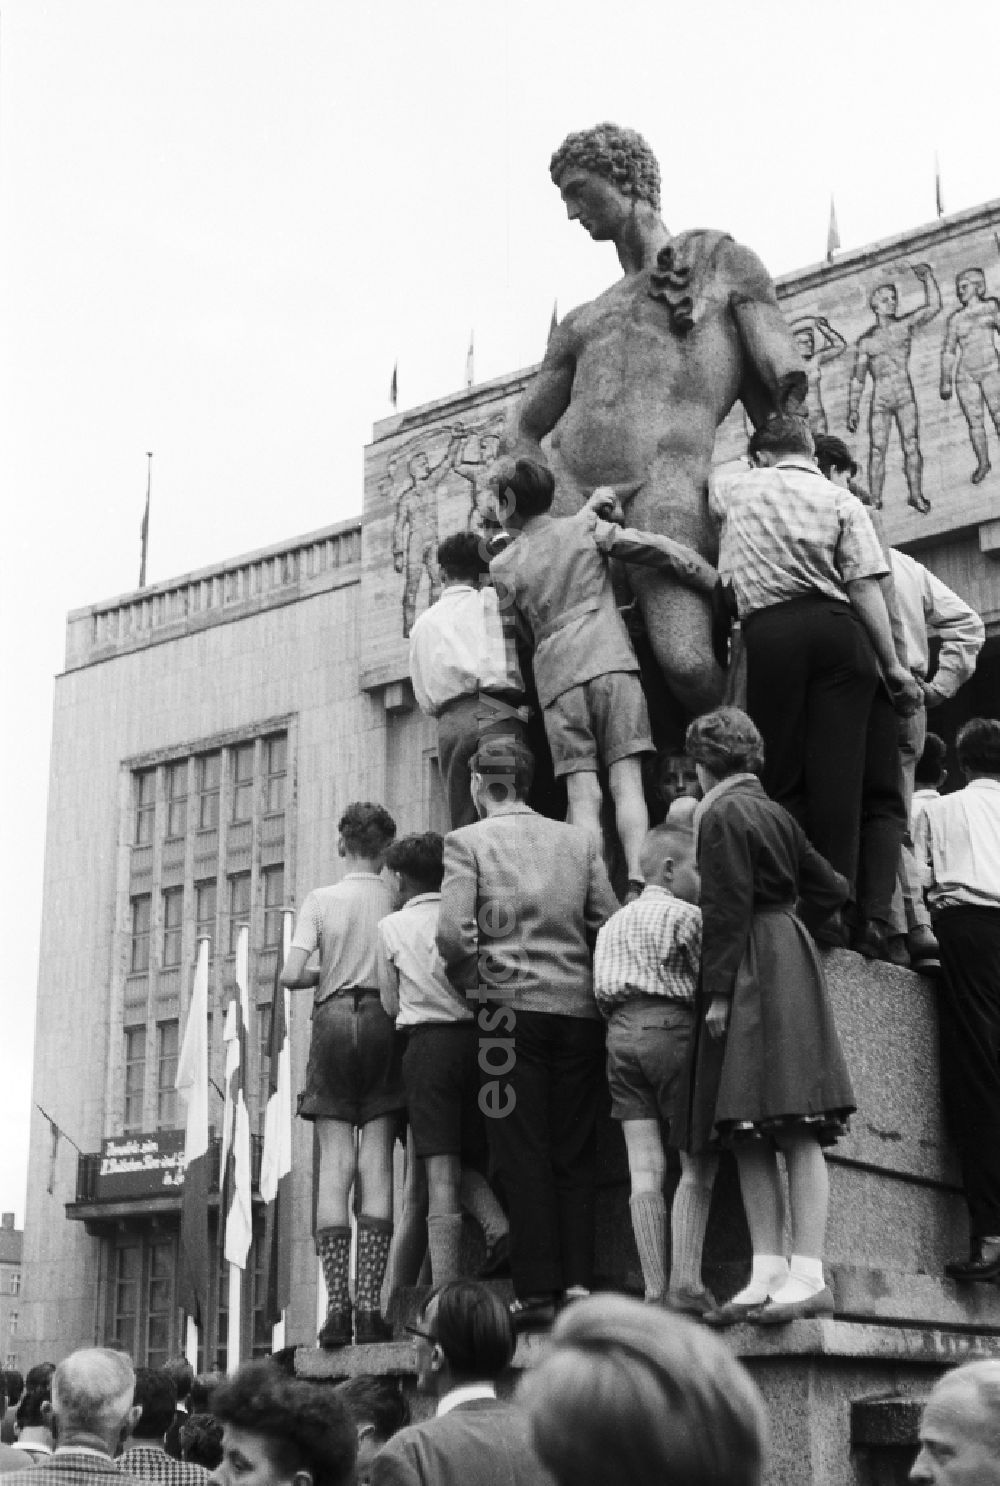 GDR photo archive: Berlin - A group of children and Judendlichen stand on the base of the sculpture and copy of a late-classicistic male figure before the entrance of the gymnasium in the Stalin's avenue in Berlin, the former capital of the GDR, German democratic republic